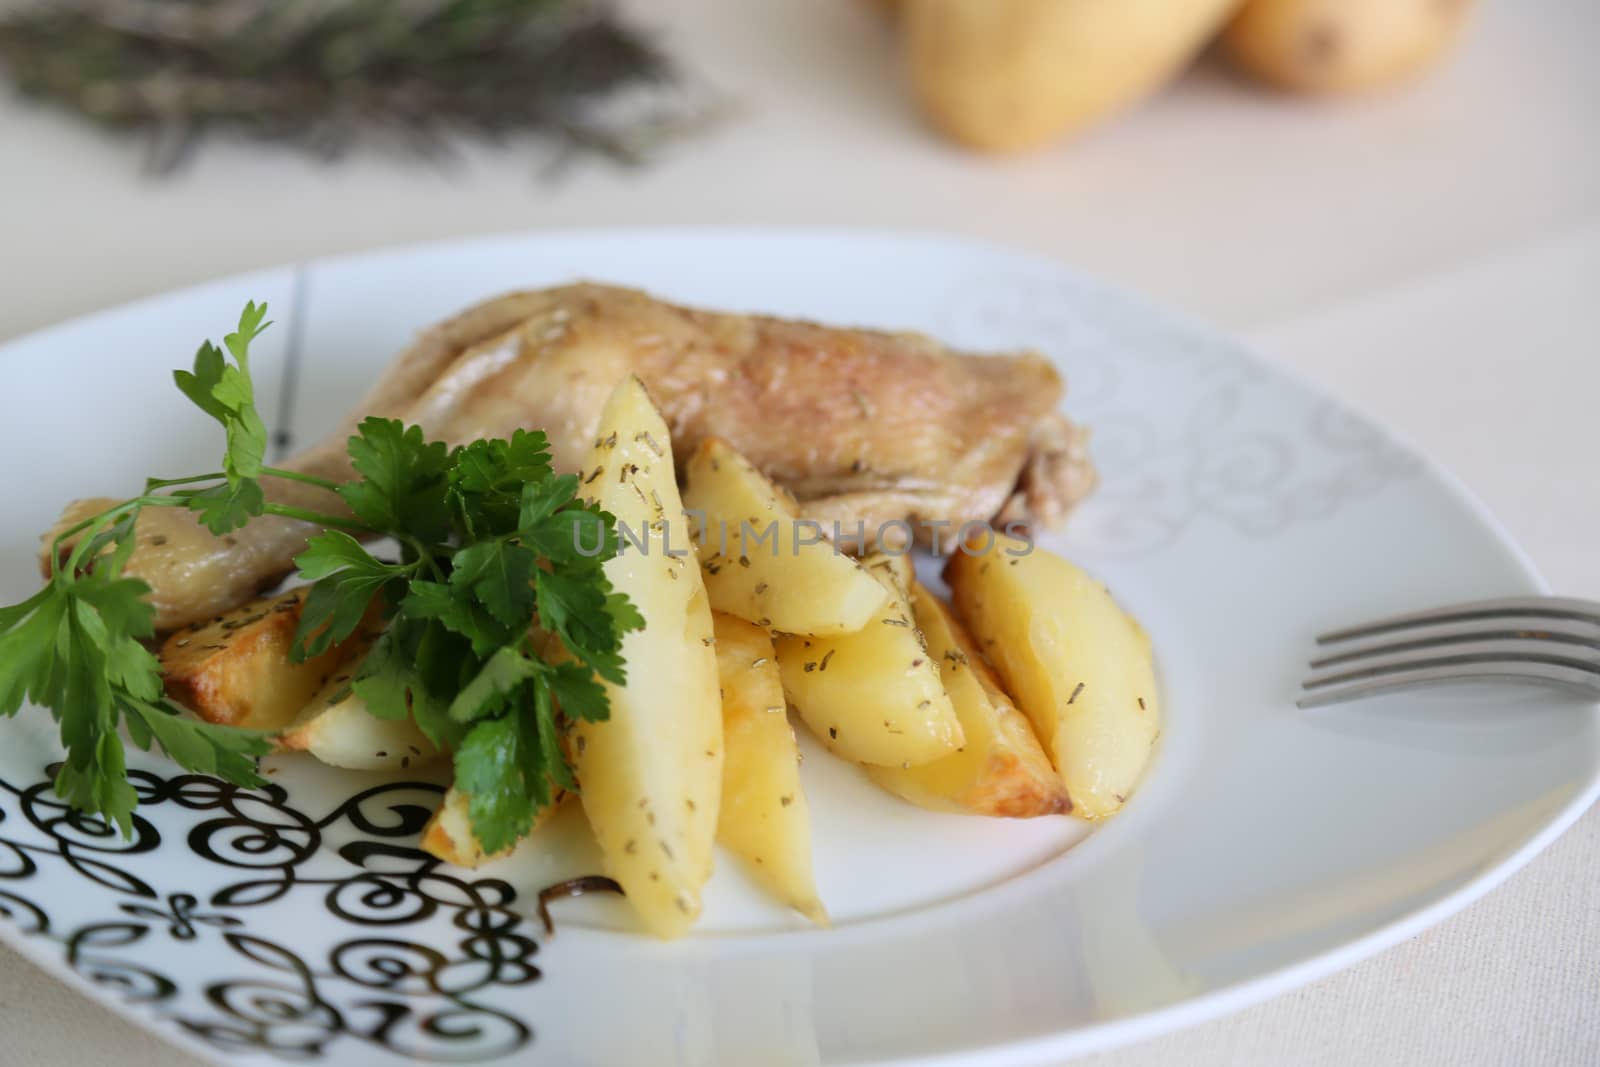 A plate with baked potatoes, chicken, fresh parsley with a fork on the plate